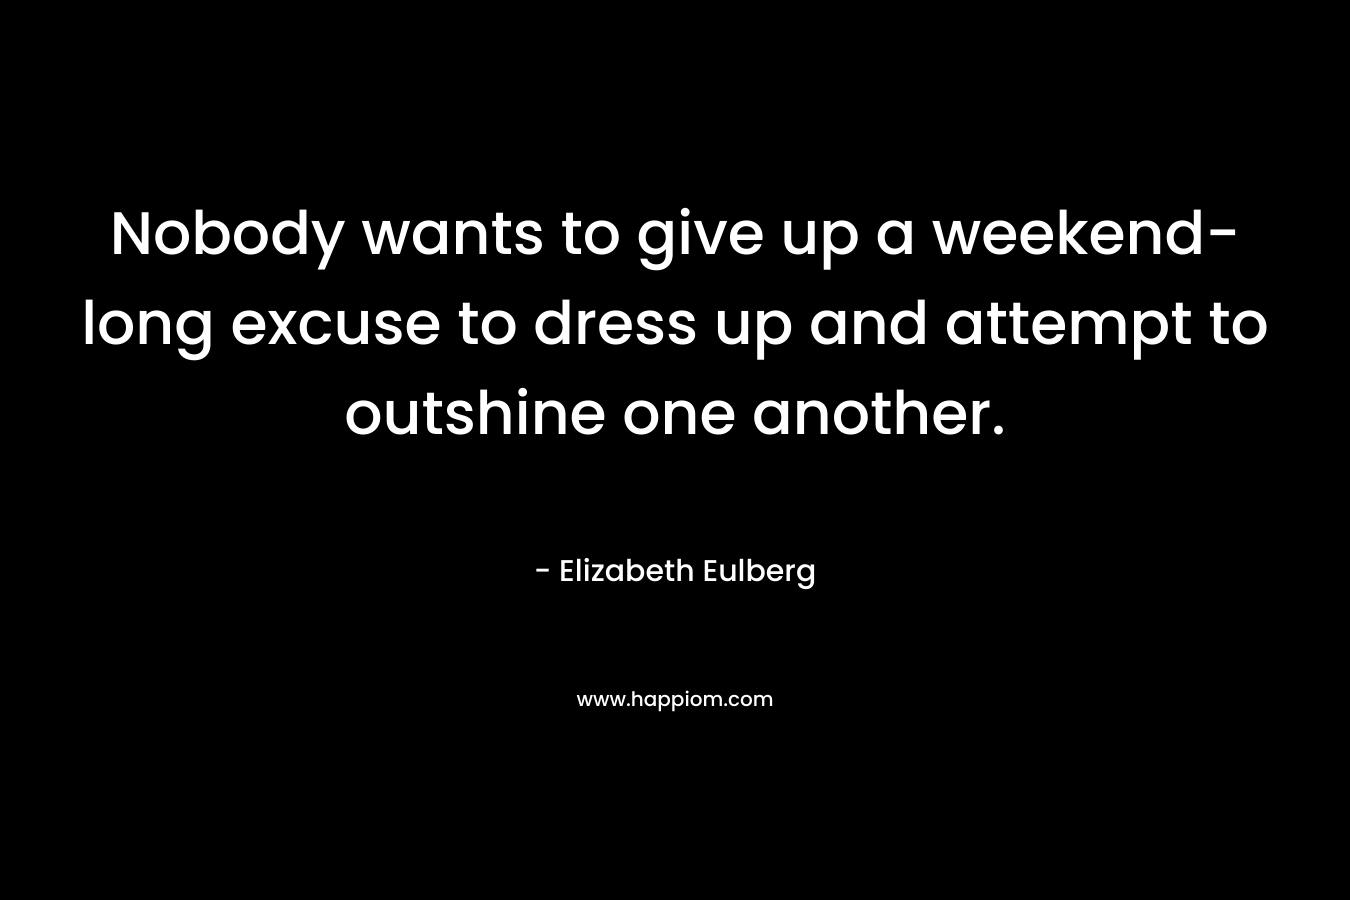 Nobody wants to give up a weekend-long excuse to dress up and attempt to outshine one another. – Elizabeth Eulberg